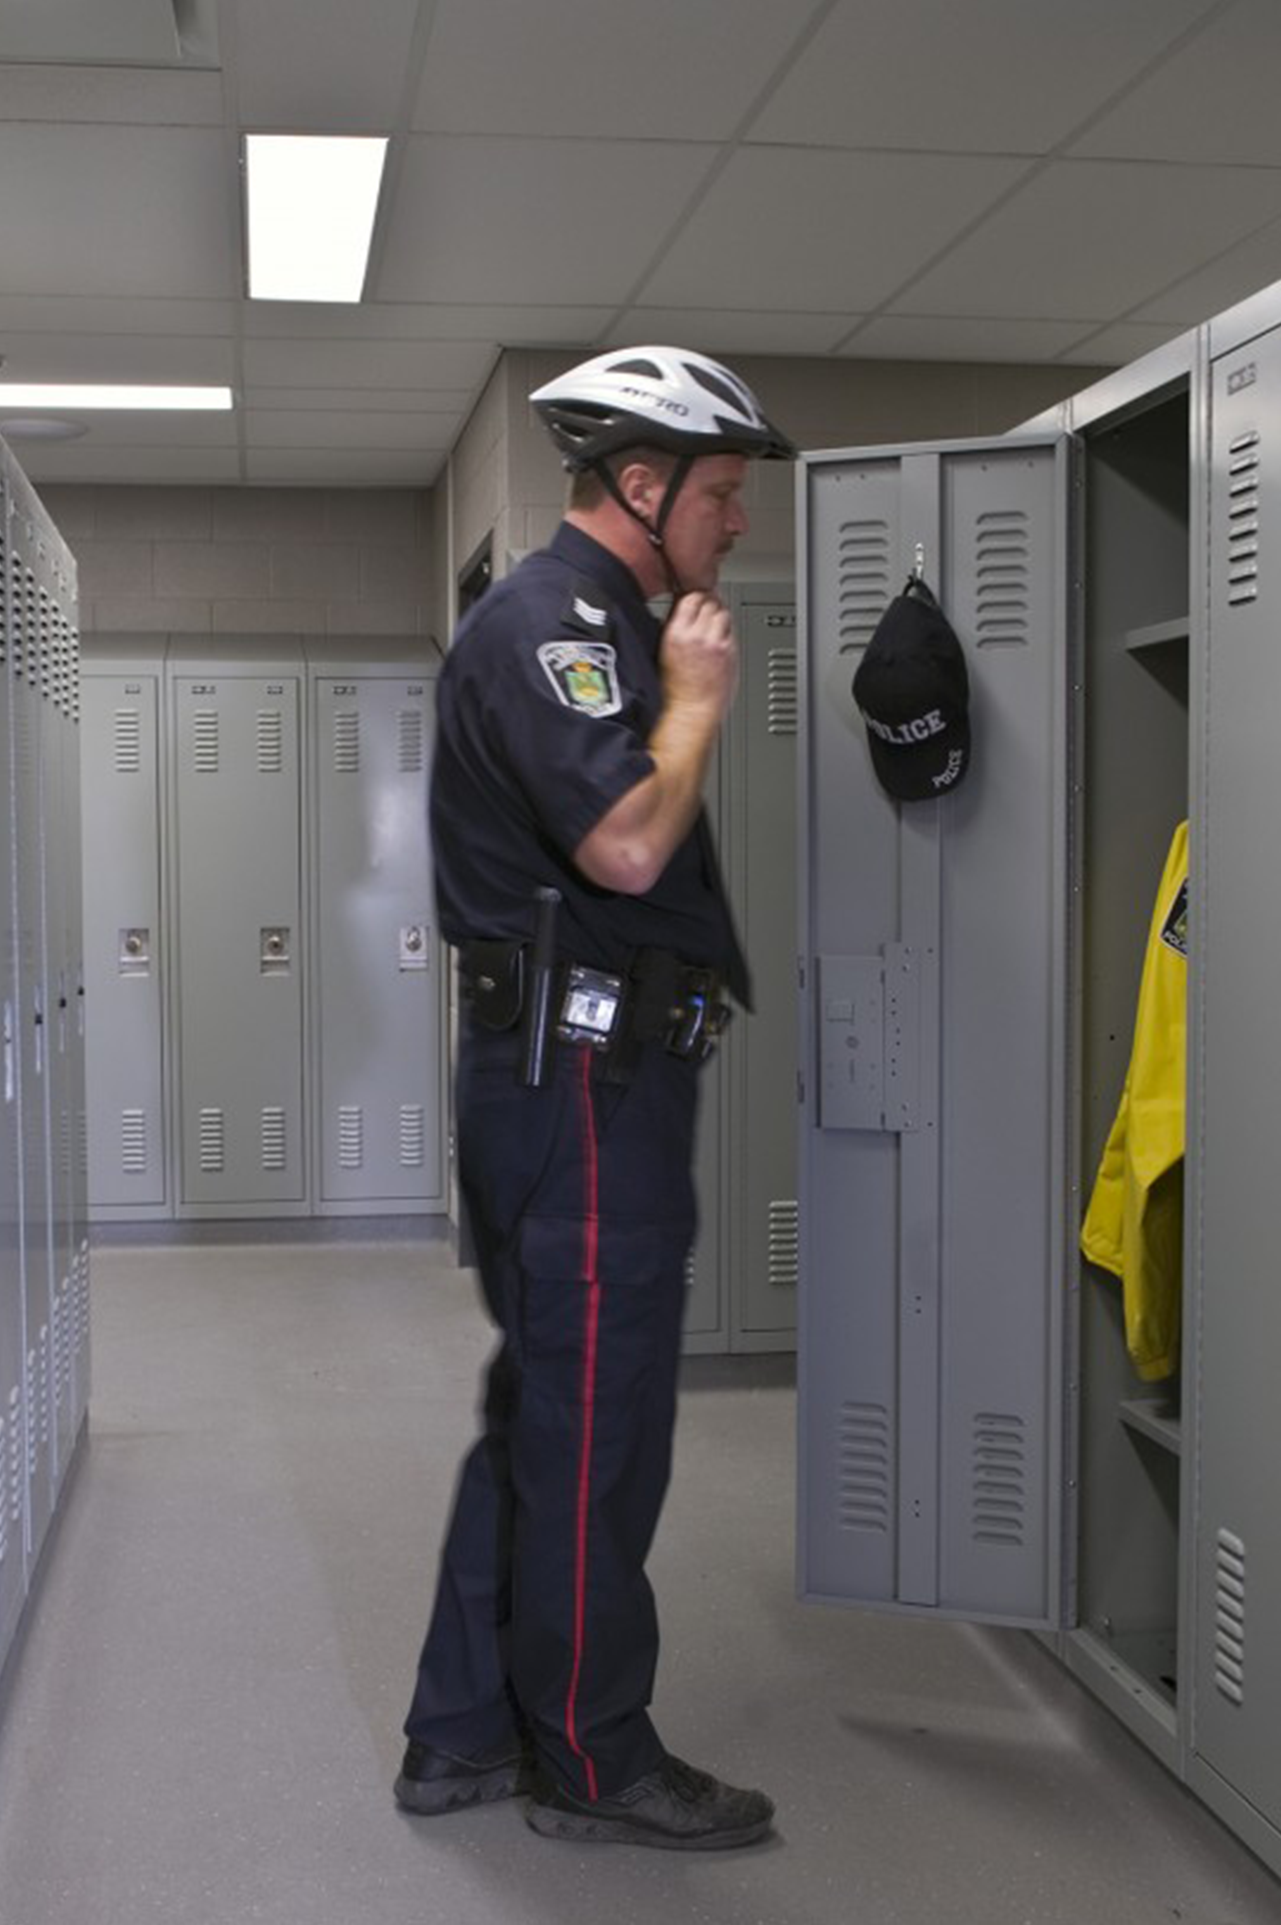 Ventilated doors and hasp locks are just a few of the features of the personal storage lockers at Peterborough Police Department